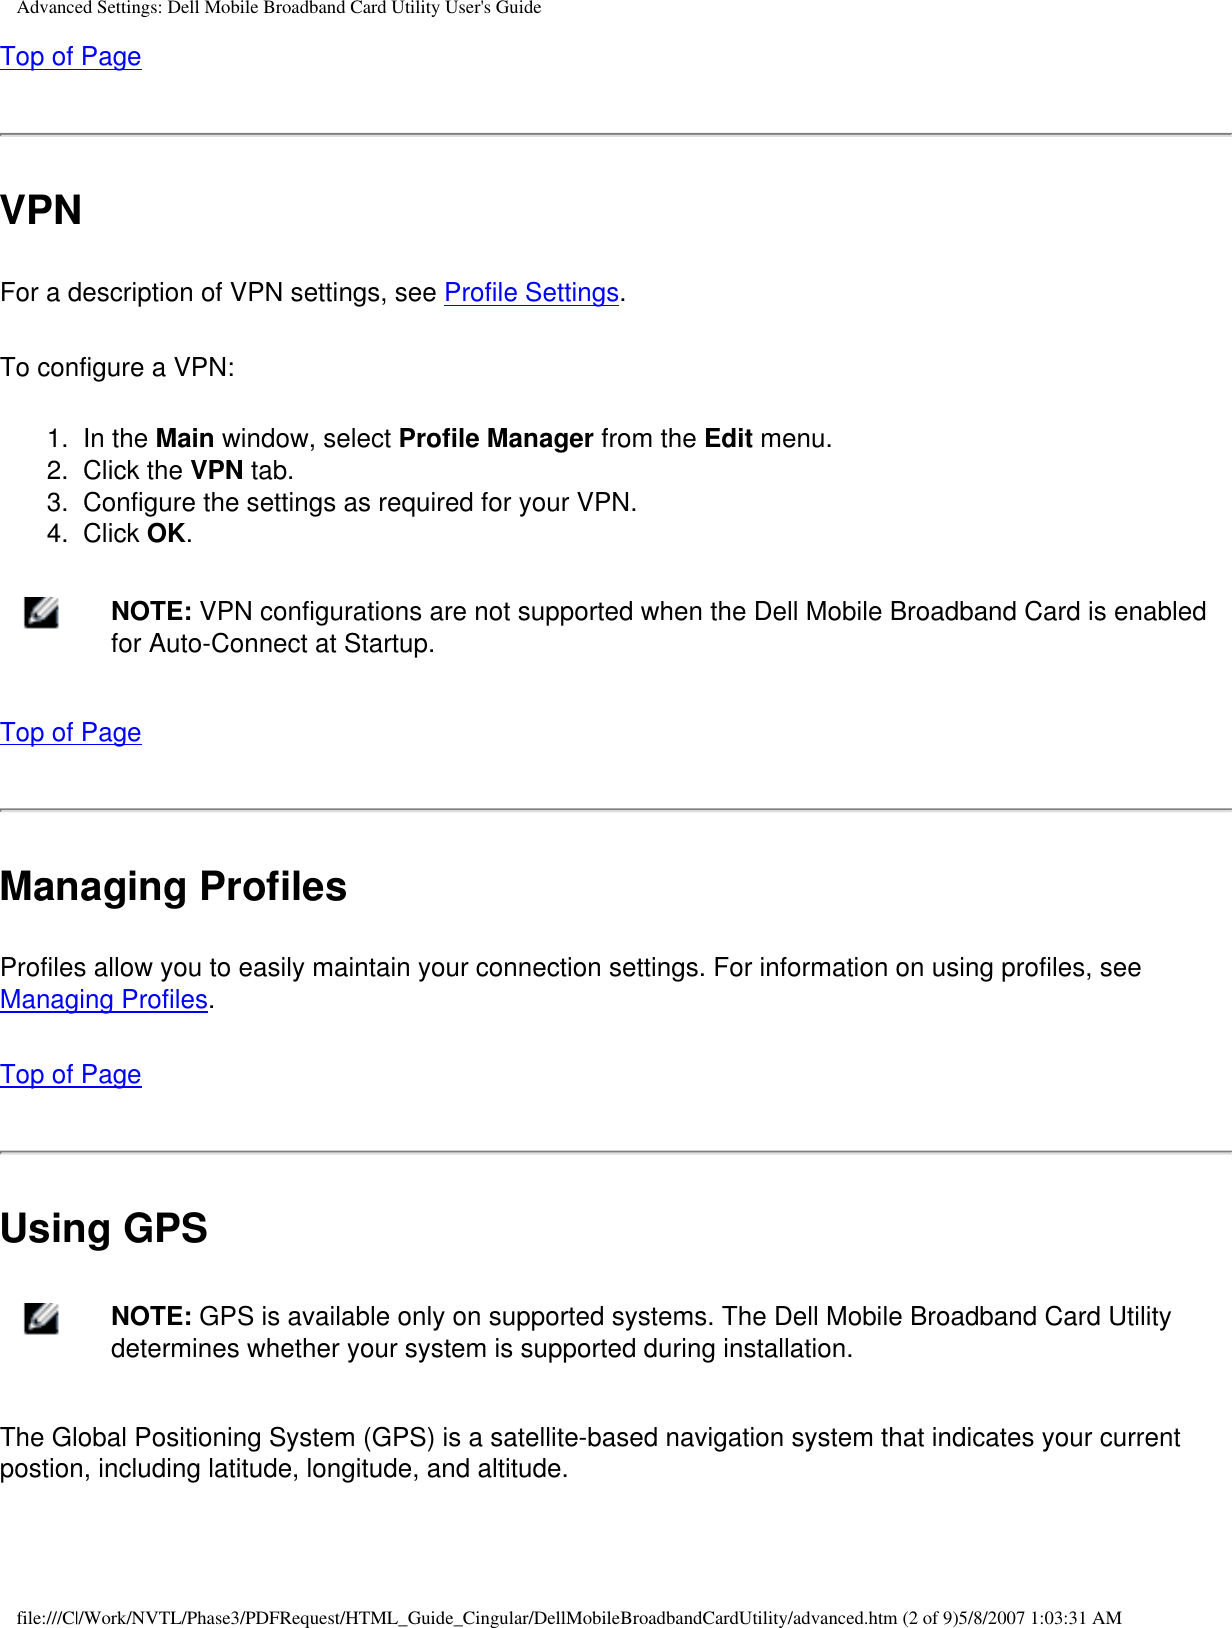 Advanced Settings: Dell Mobile Broadband Card Utility User&apos;s GuideTop of PageVPNFor a description of VPN settings, see Profile Settings.To configure a VPN:1.  In the Main window, select Profile Manager from the Edit menu.2.  Click the VPN tab.3.  Configure the settings as required for your VPN. 4.  Click OK.    NOTE: VPN configurations are not supported when the Dell Mobile Broadband Card is enabled for Auto-Connect at Startup.Top of PageManaging ProfilesProfiles allow you to easily maintain your connection settings. For information on using profiles, see Managing Profiles.Top of PageUsing GPS    NOTE: GPS is available only on supported systems. The Dell Mobile Broadband Card Utility determines whether your system is supported during installation.The Global Positioning System (GPS) is a satellite-based navigation system that indicates your current postion, including latitude, longitude, and altitude.file:///C|/Work/NVTL/Phase3/PDFRequest/HTML_Guide_Cingular/DellMobileBroadbandCardUtility/advanced.htm (2 of 9)5/8/2007 1:03:31 AM